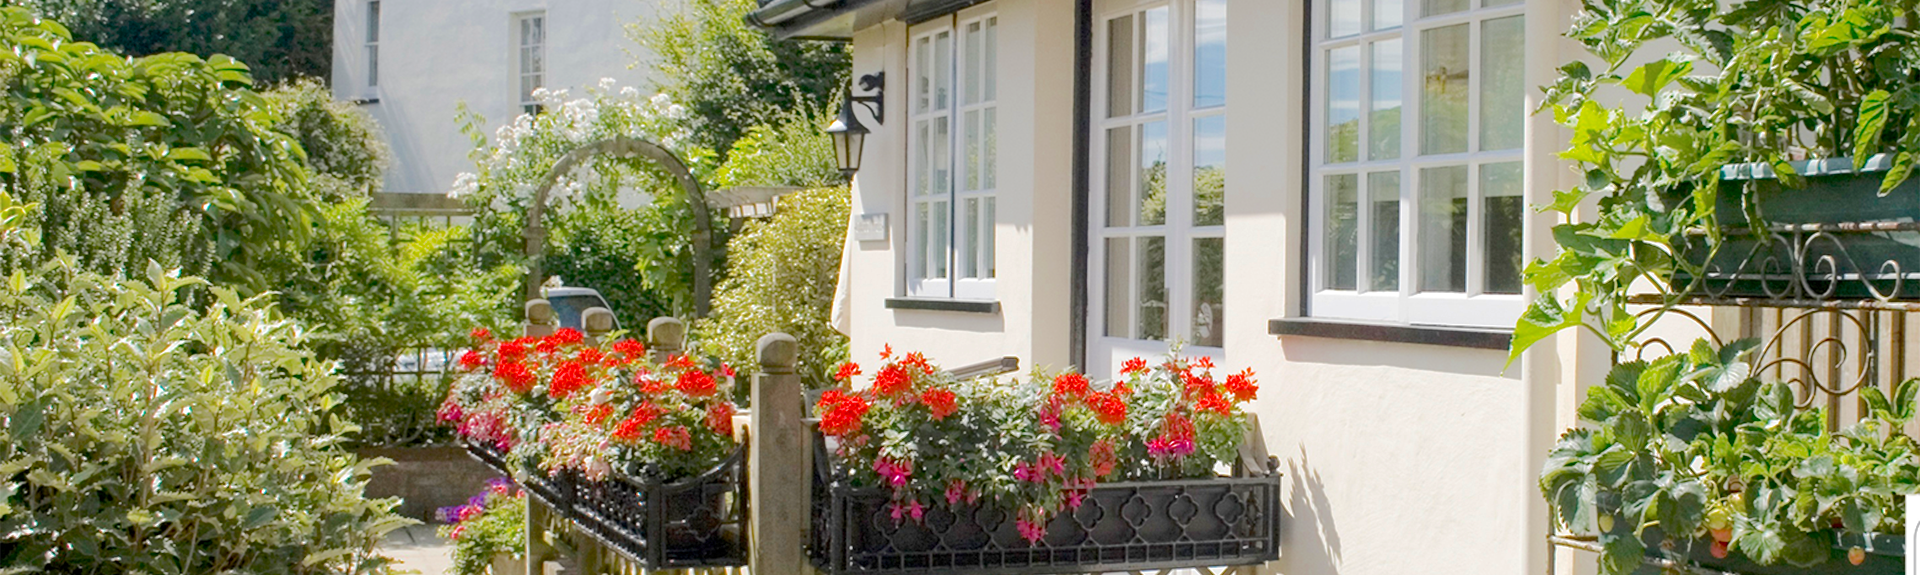 Exterior of a Regency cottage and garden in Sidmouth